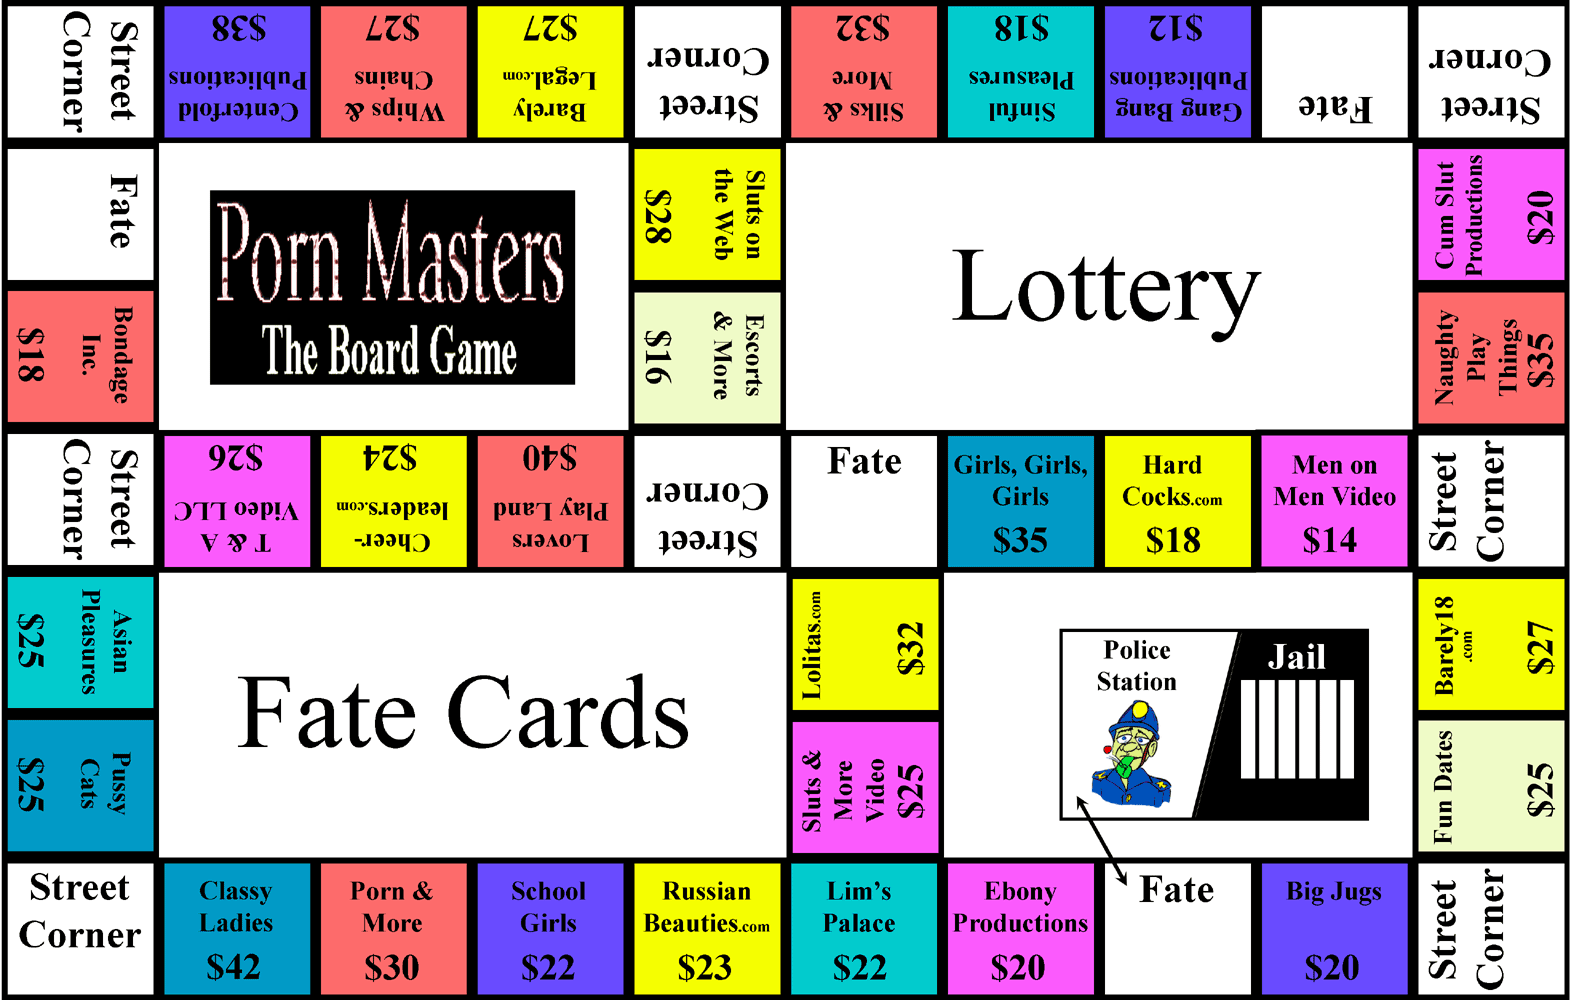 Porn Masters the Board Game